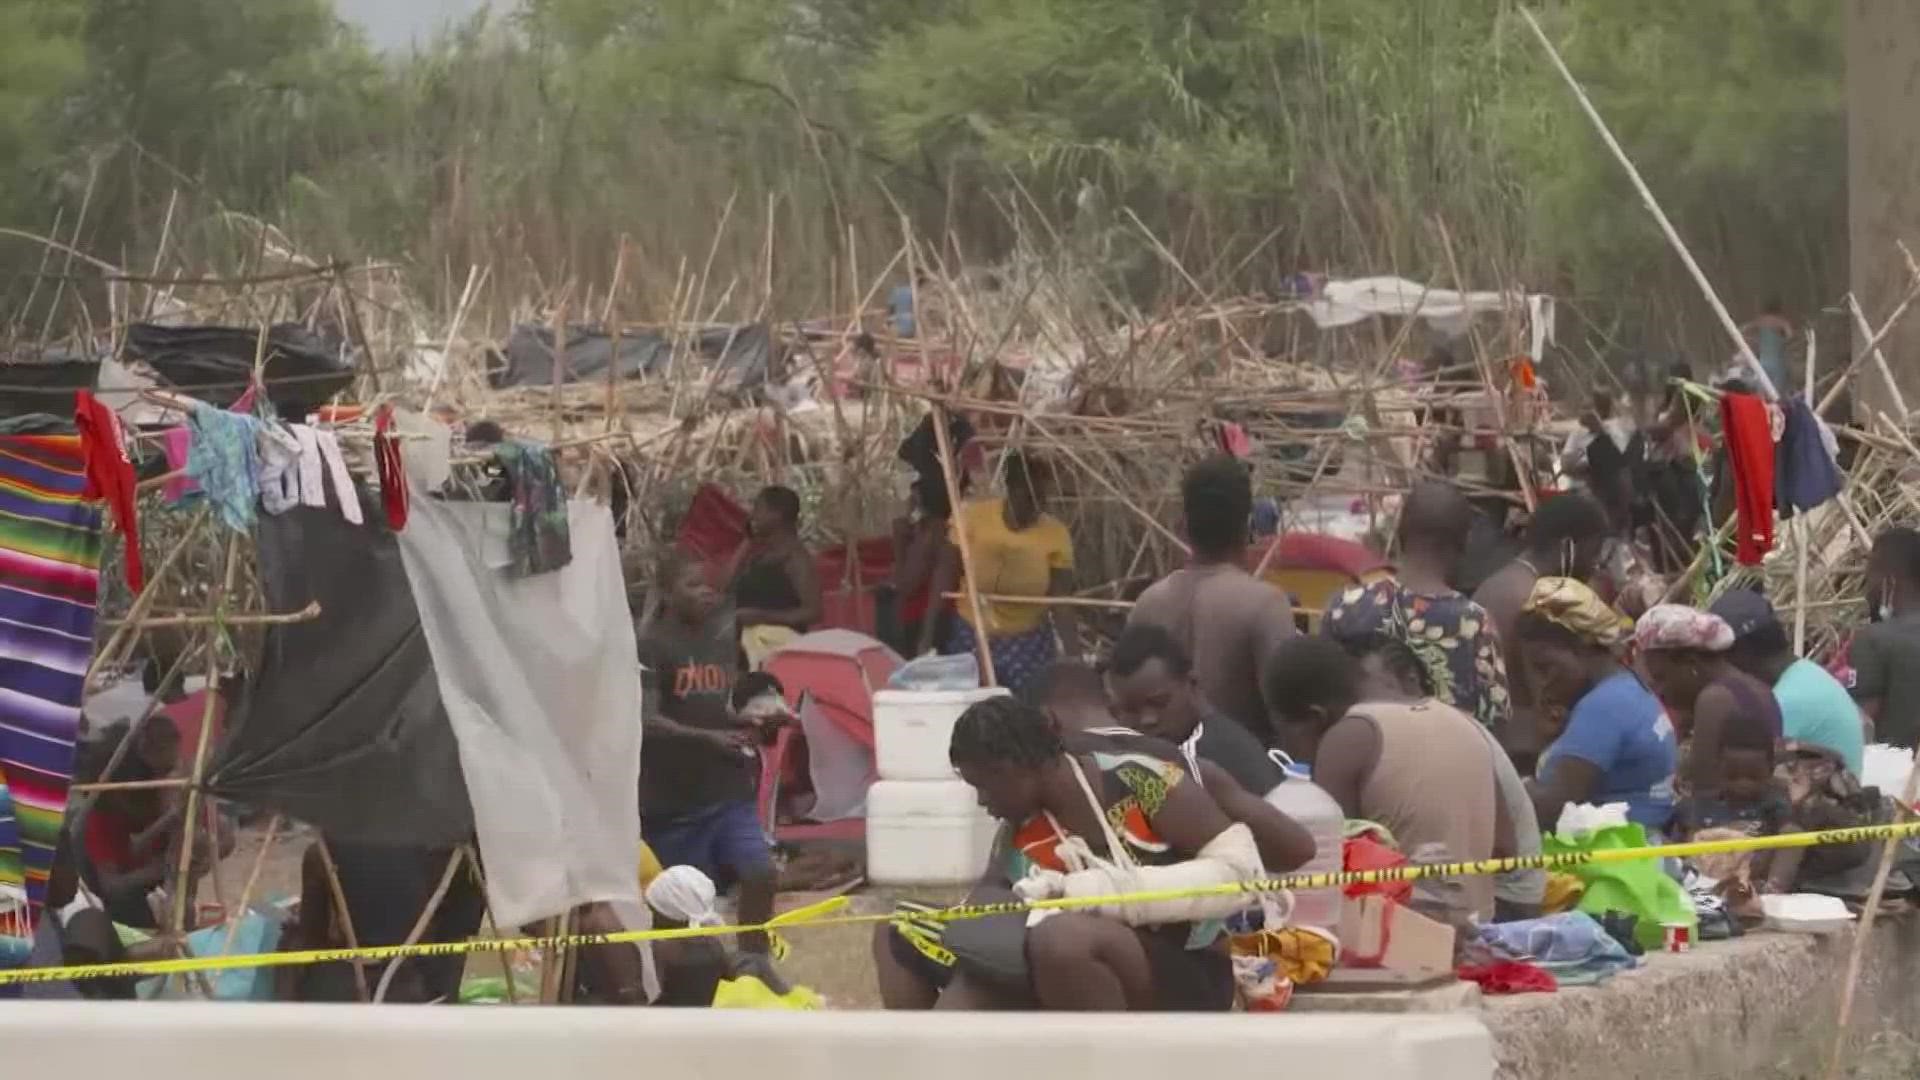 U.S. officials say many Haitian migrants camped in the Texas border town of Del Rio are being released to other cities in the United States.